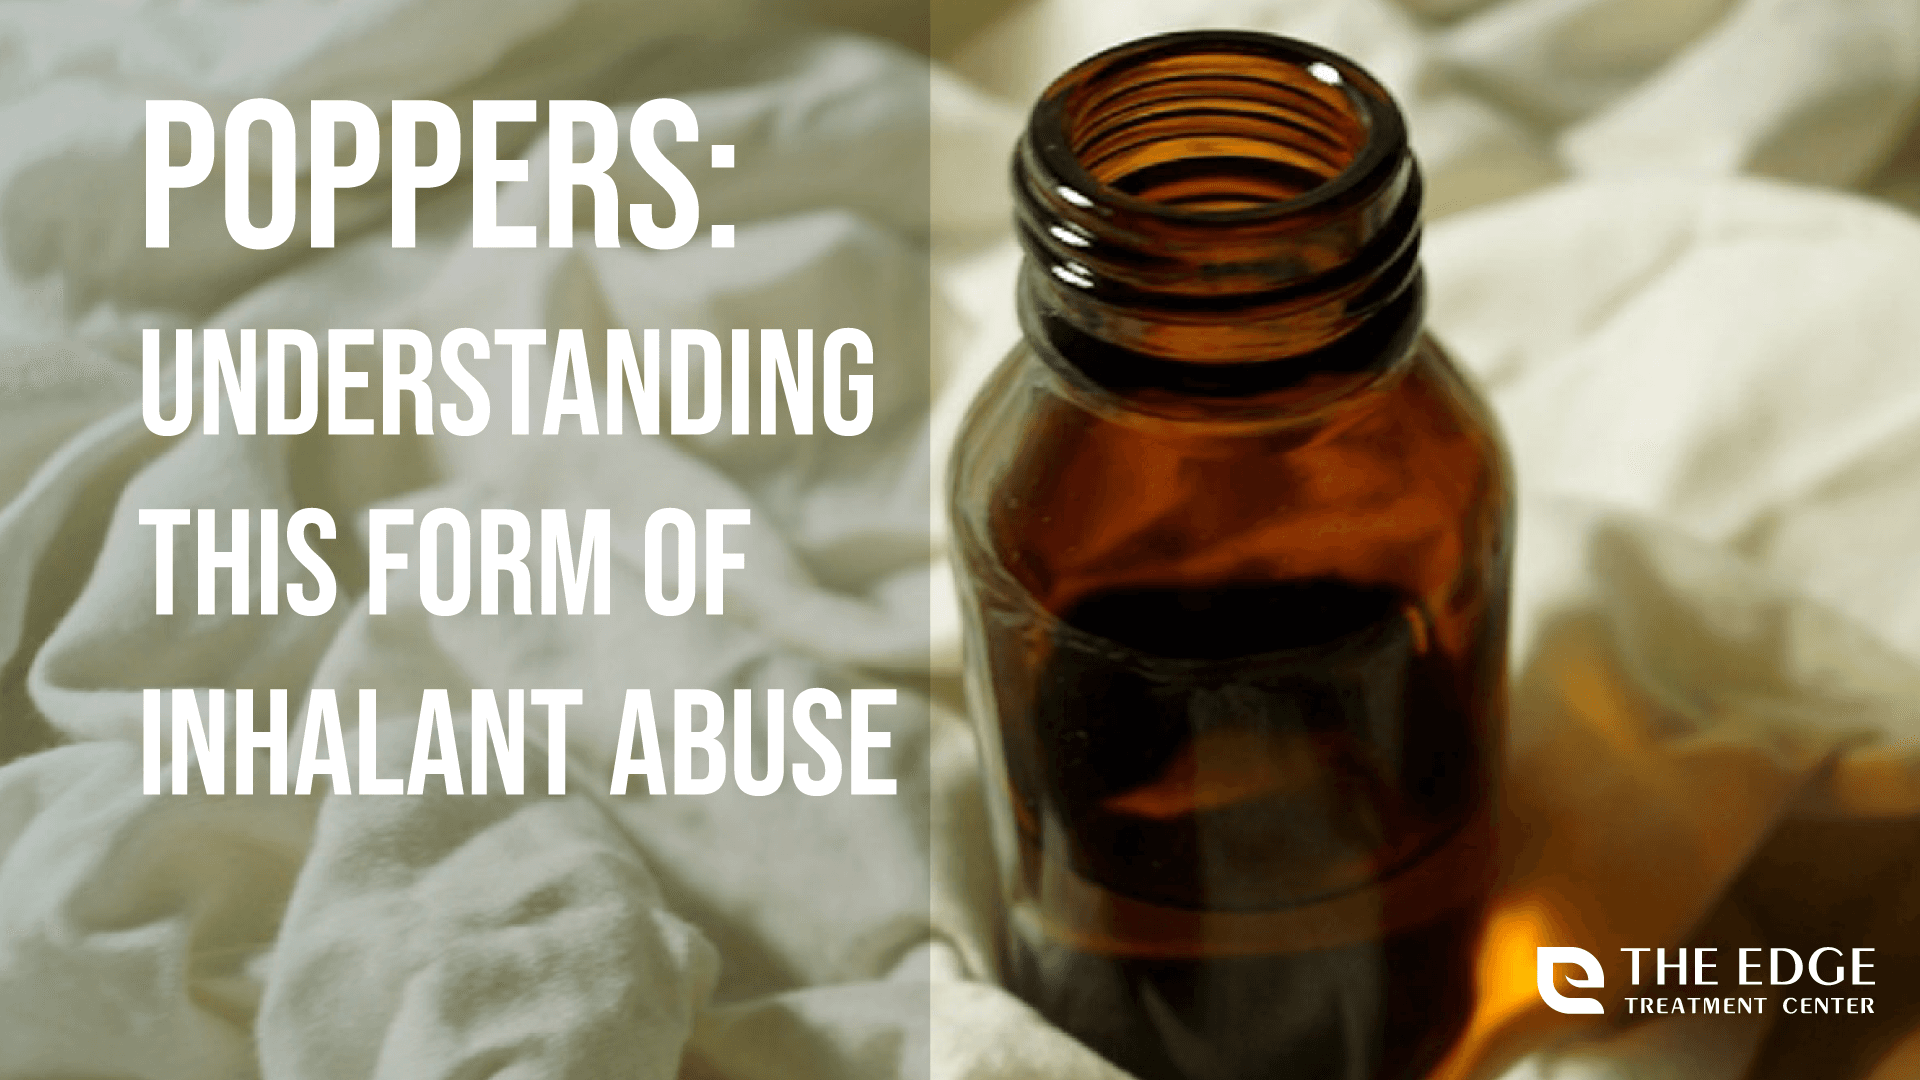 Poppers: Understanding this Form of Inhalant Abuse